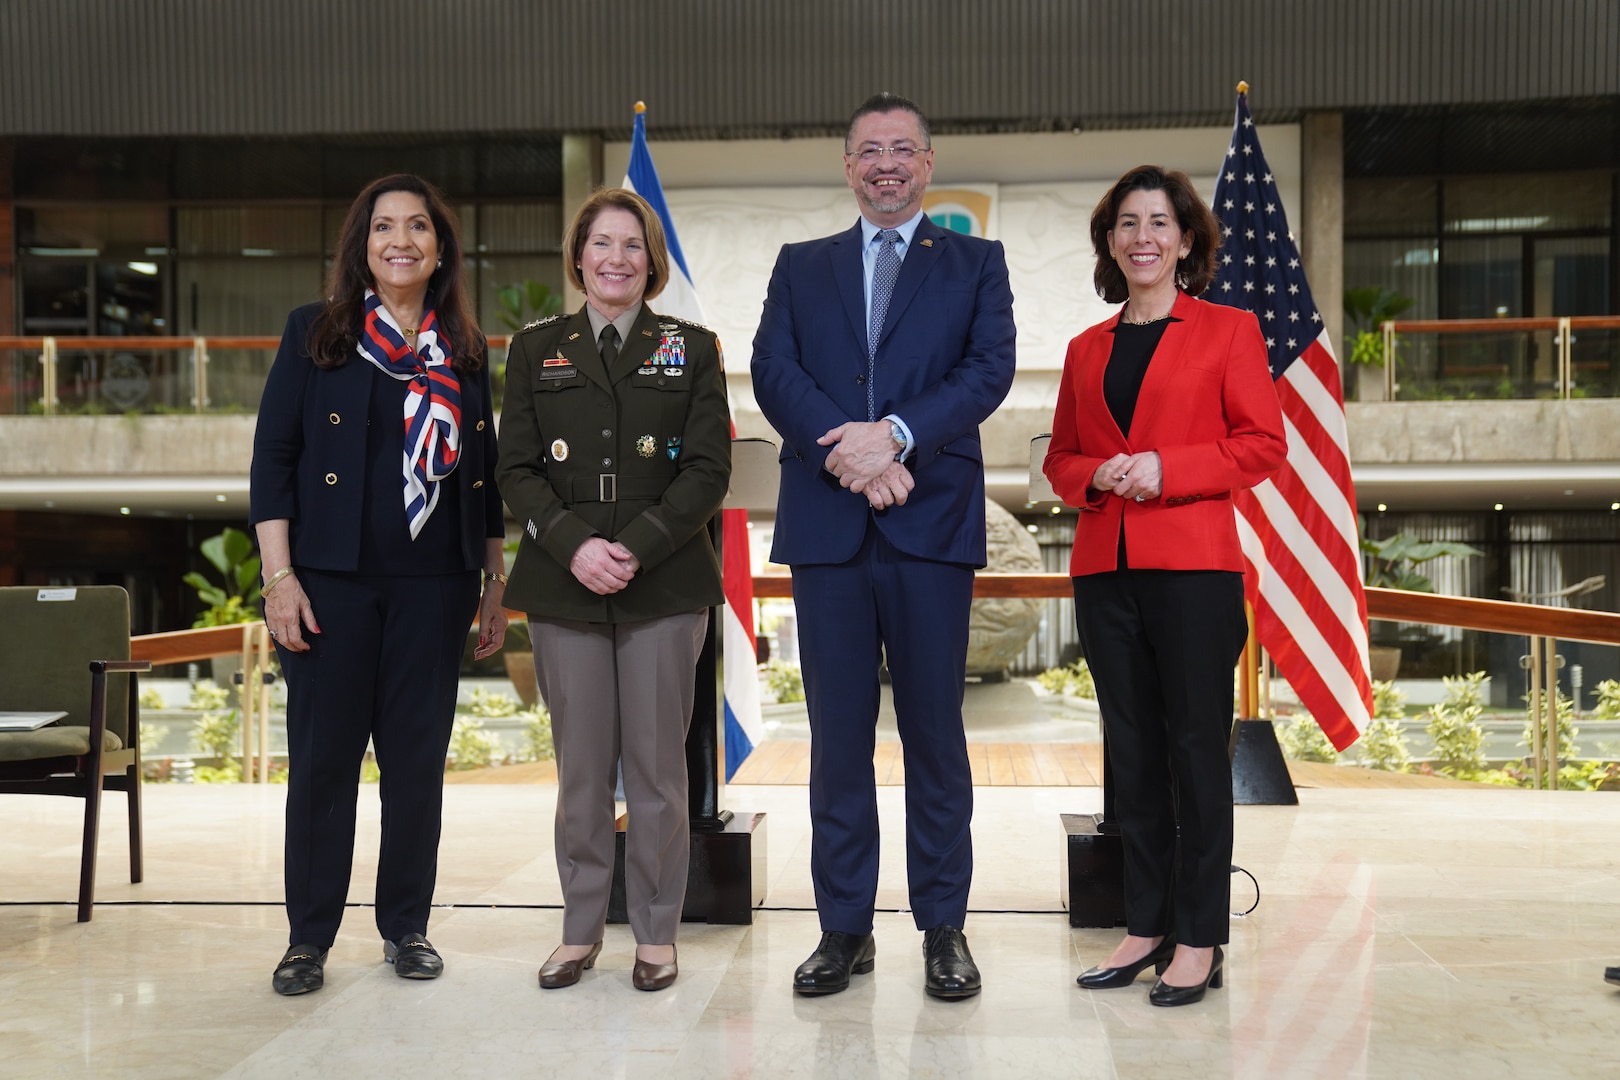 The commander of U.S. Southern Command, U.S. Army Gen. Laura Richardson takes part in a press conference with Costa Rican President Rodrigo Chaves Robles and join U.S. Secretary of Commerce Gina M. Raimondo.